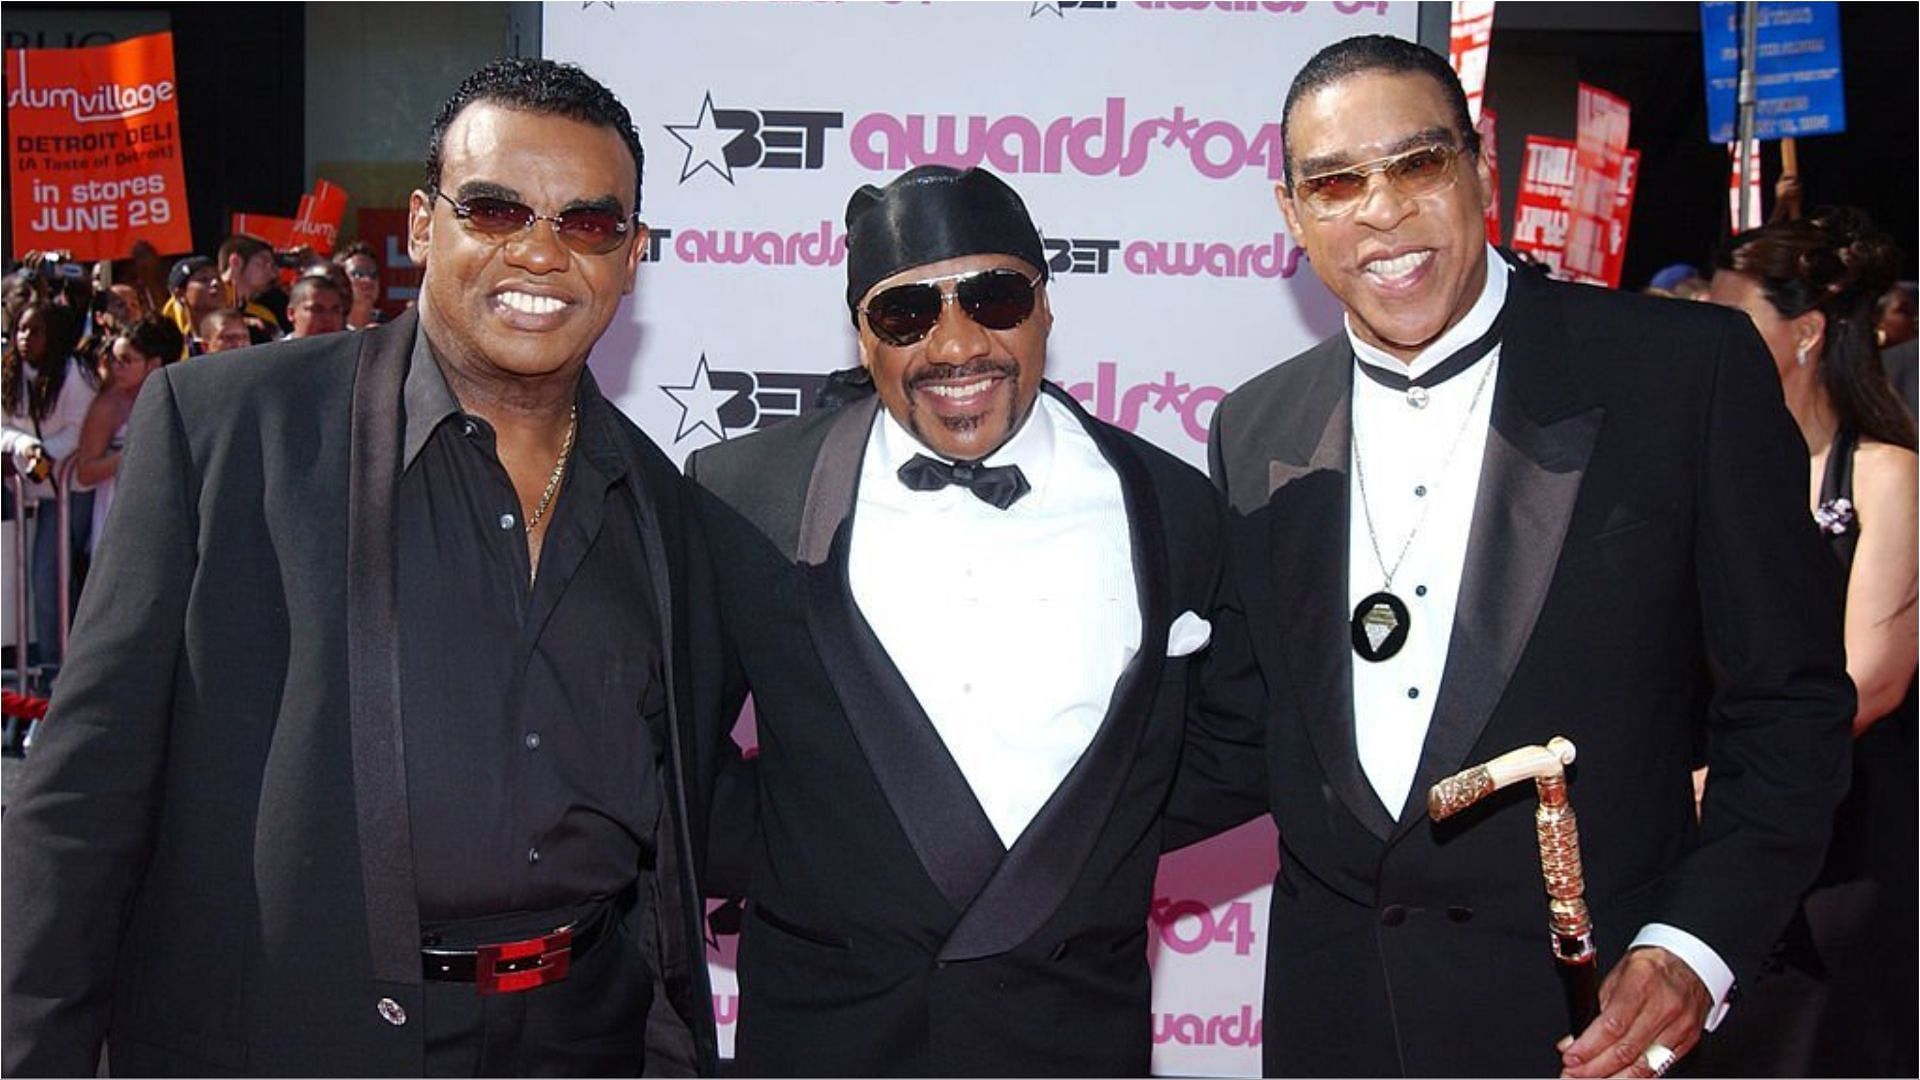 Rudolph Isley has been a member of The Isley Brothers (Image via Jon Kopaloff/Getty Images)